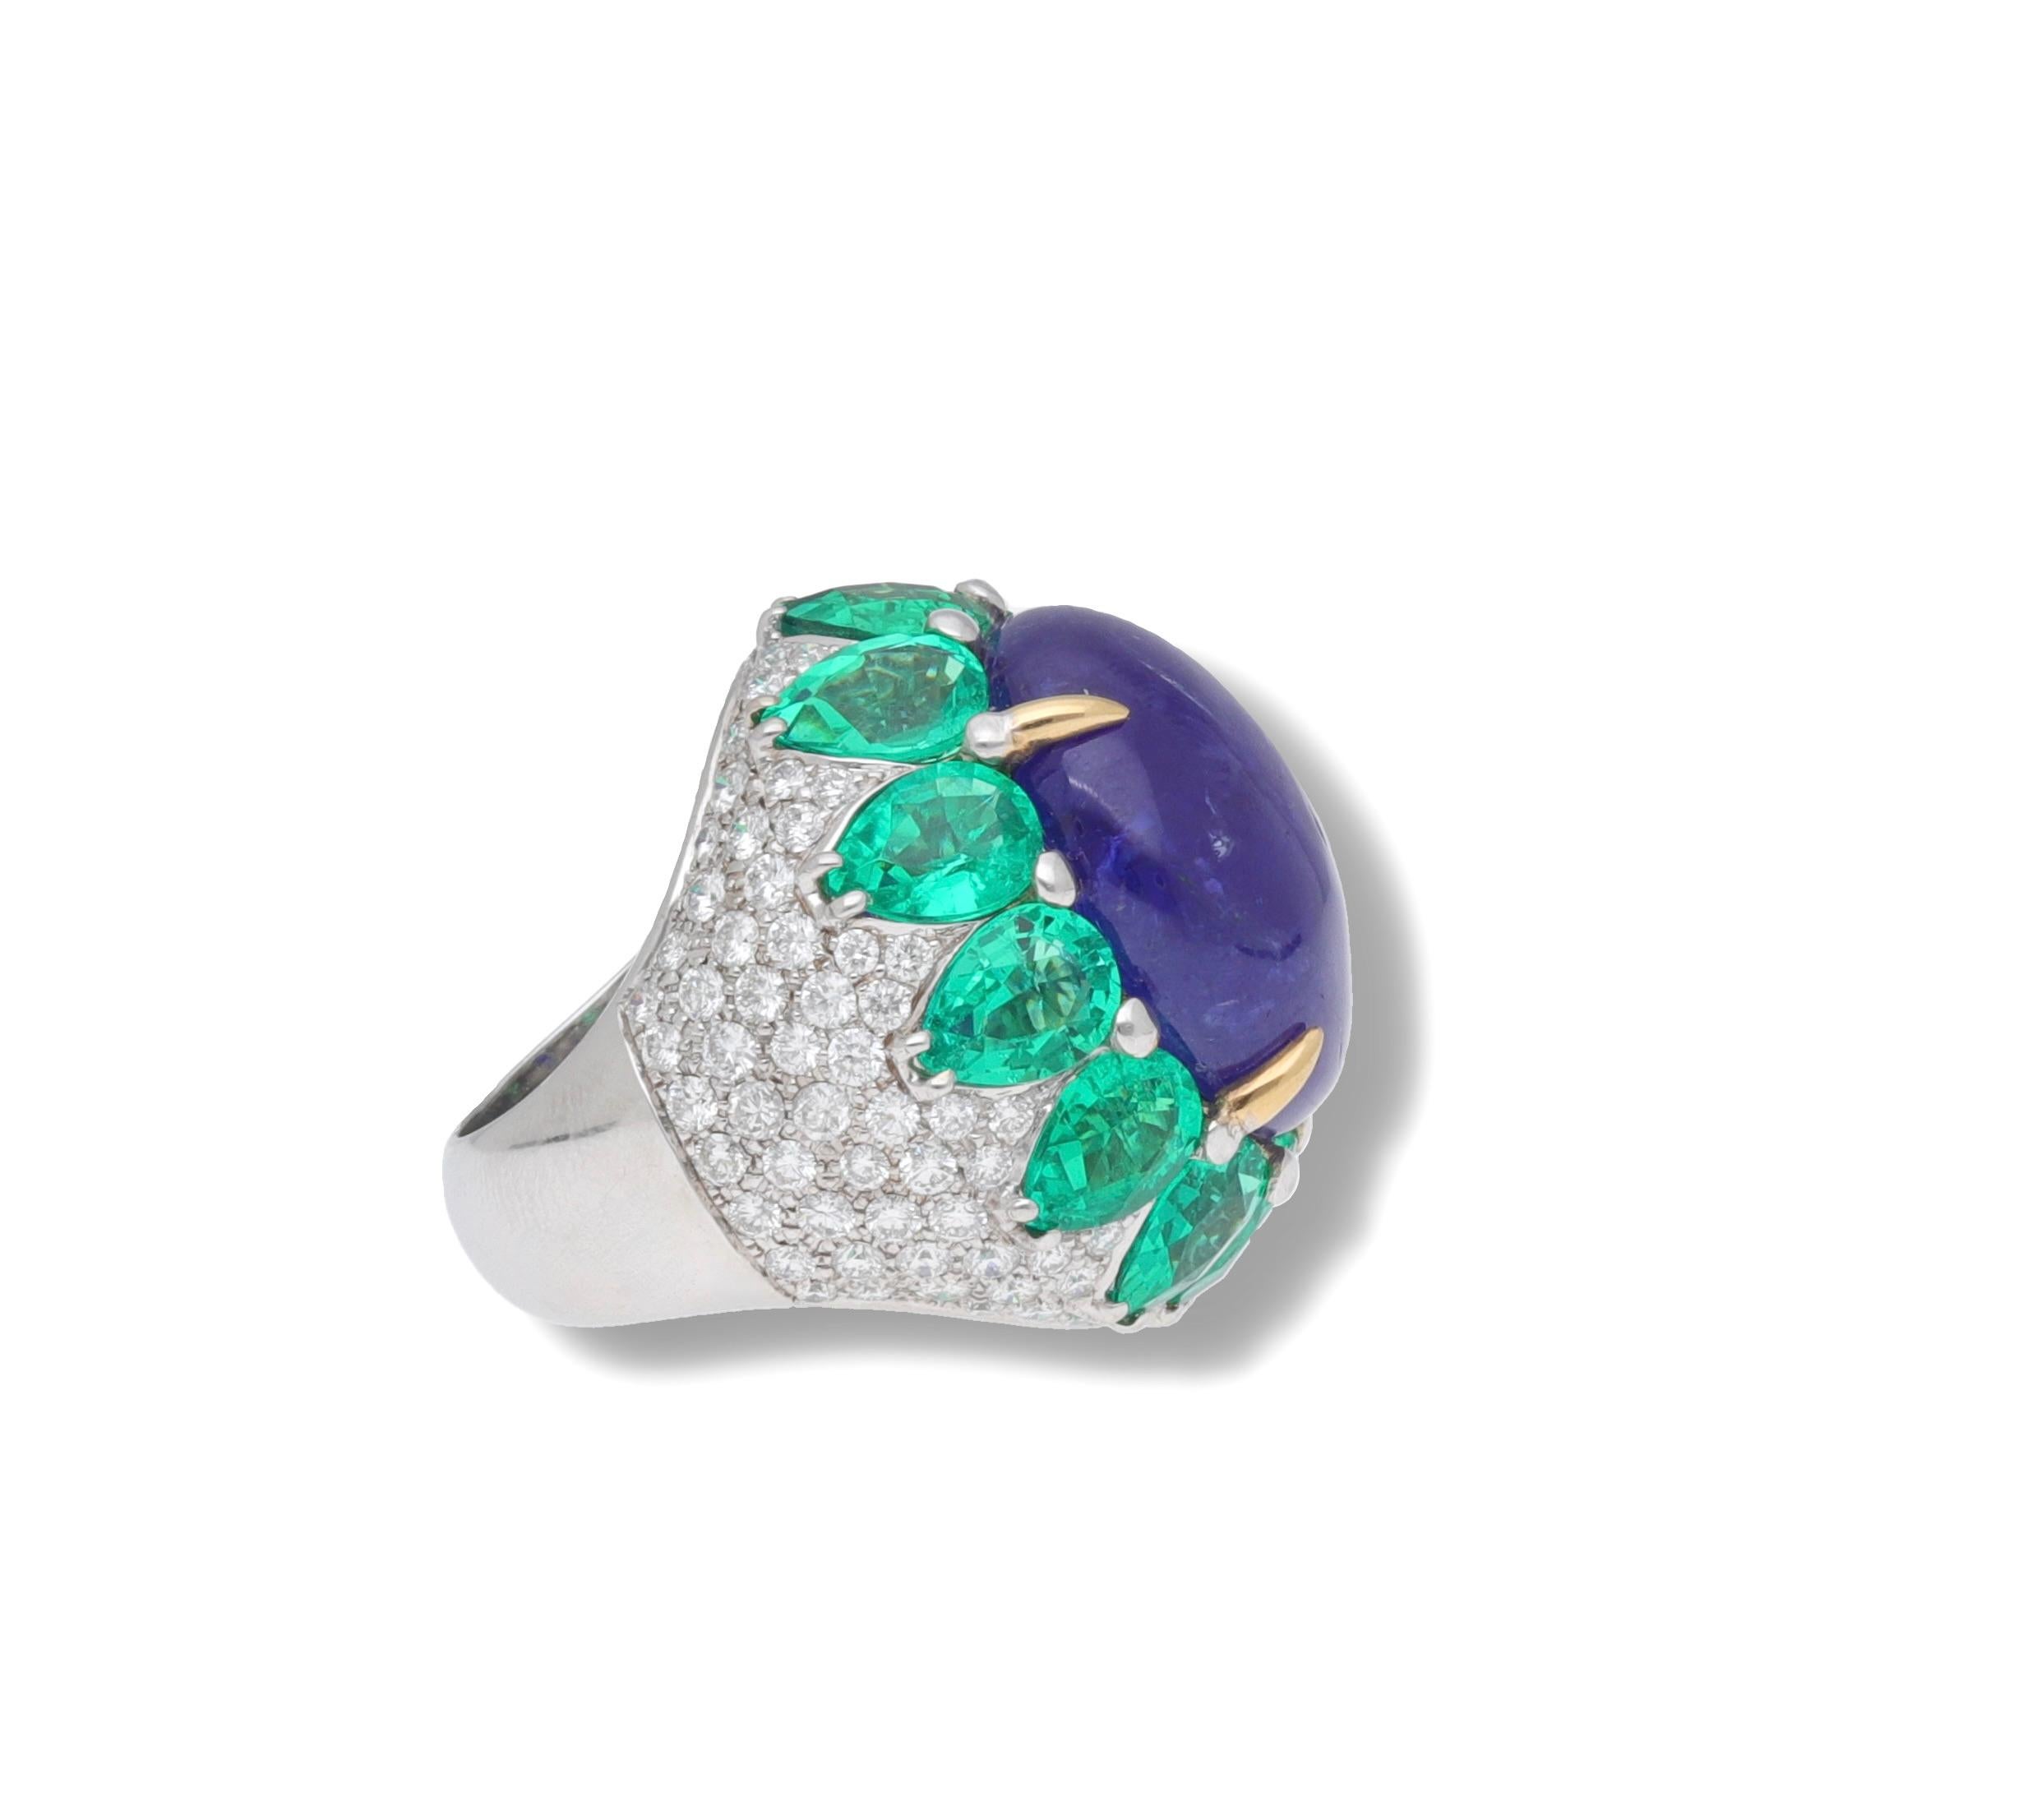 Handmade in Italy 18 kt. white gold ring with diamonds, lab-created emeralds and tanzanite cabochon.
This ring belongs to the Queen Fraleoni Collection and is a unique piece.
The central tanzanite is surrounded by a crown of lab-created emeralds